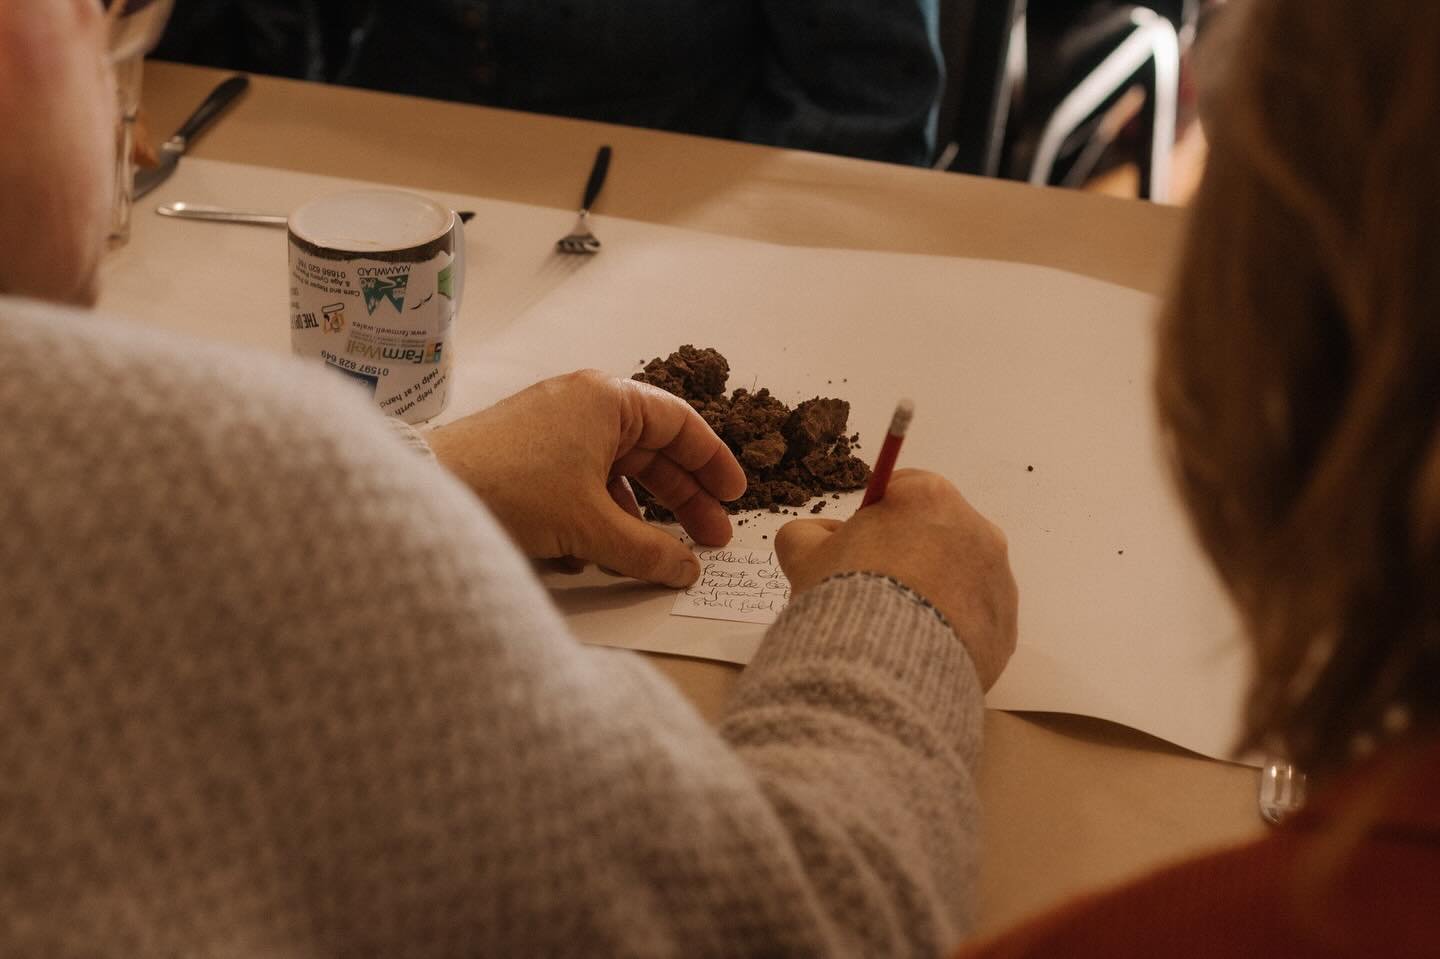 More images of the recent soil themed feast with local farmers; facilitated by @_owengriffiths for @blackmountainscollege, Owen Sheers and @bassline_circus - Diolch 

Thanks Bethan Flynn for the great images / Diolch! 

@food_art_research_network @ce